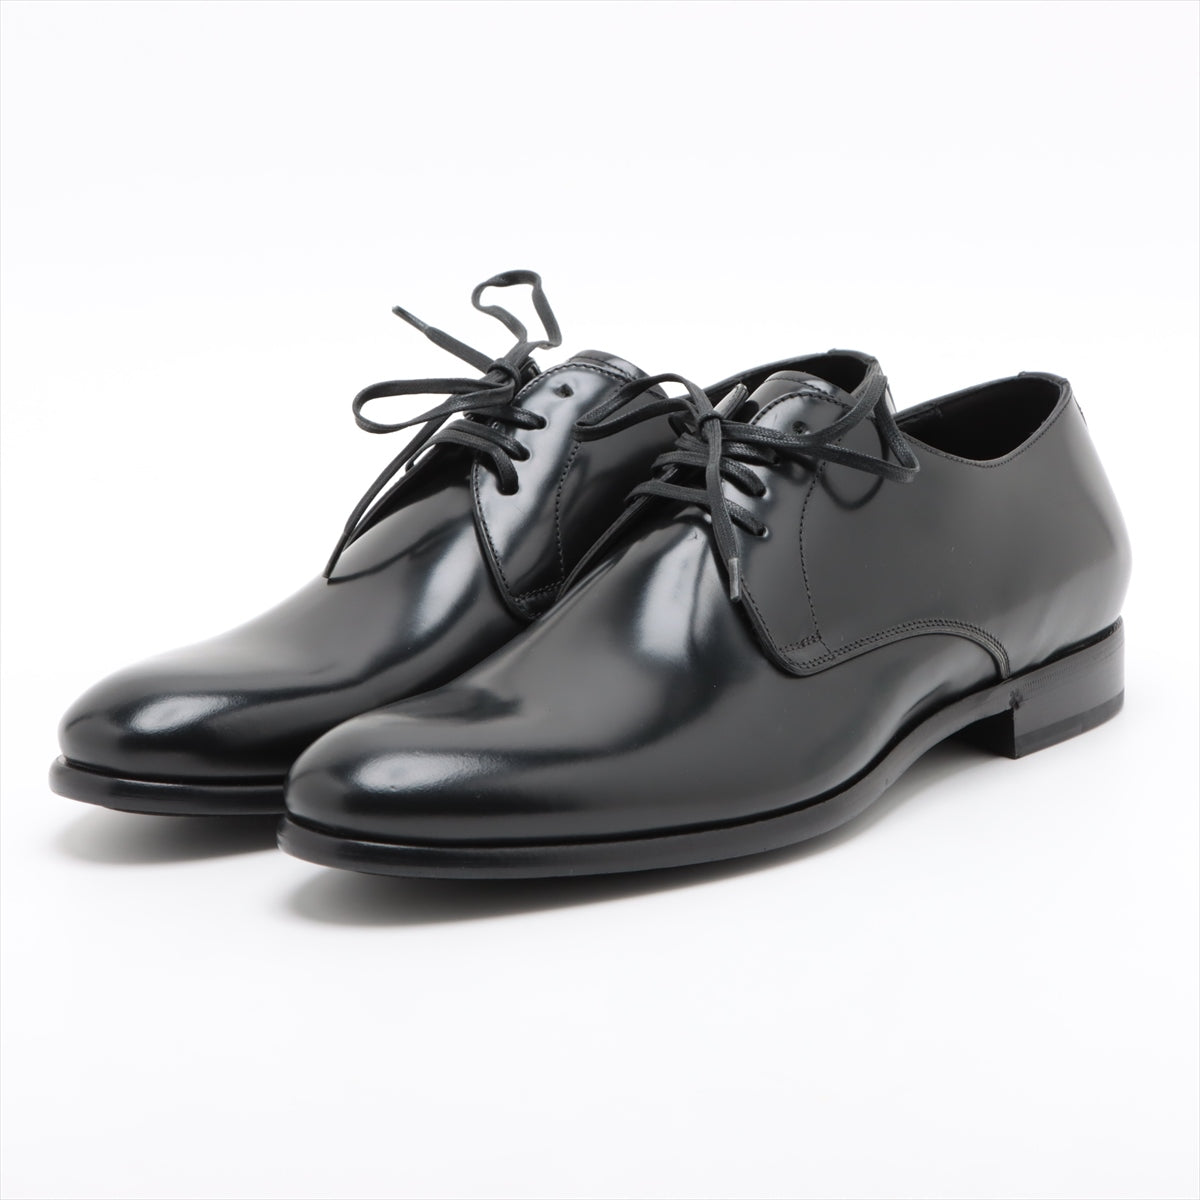 Dolce & Gabbana Leather Dress shoes 8 Men's Black A10086 Is there a replacement string